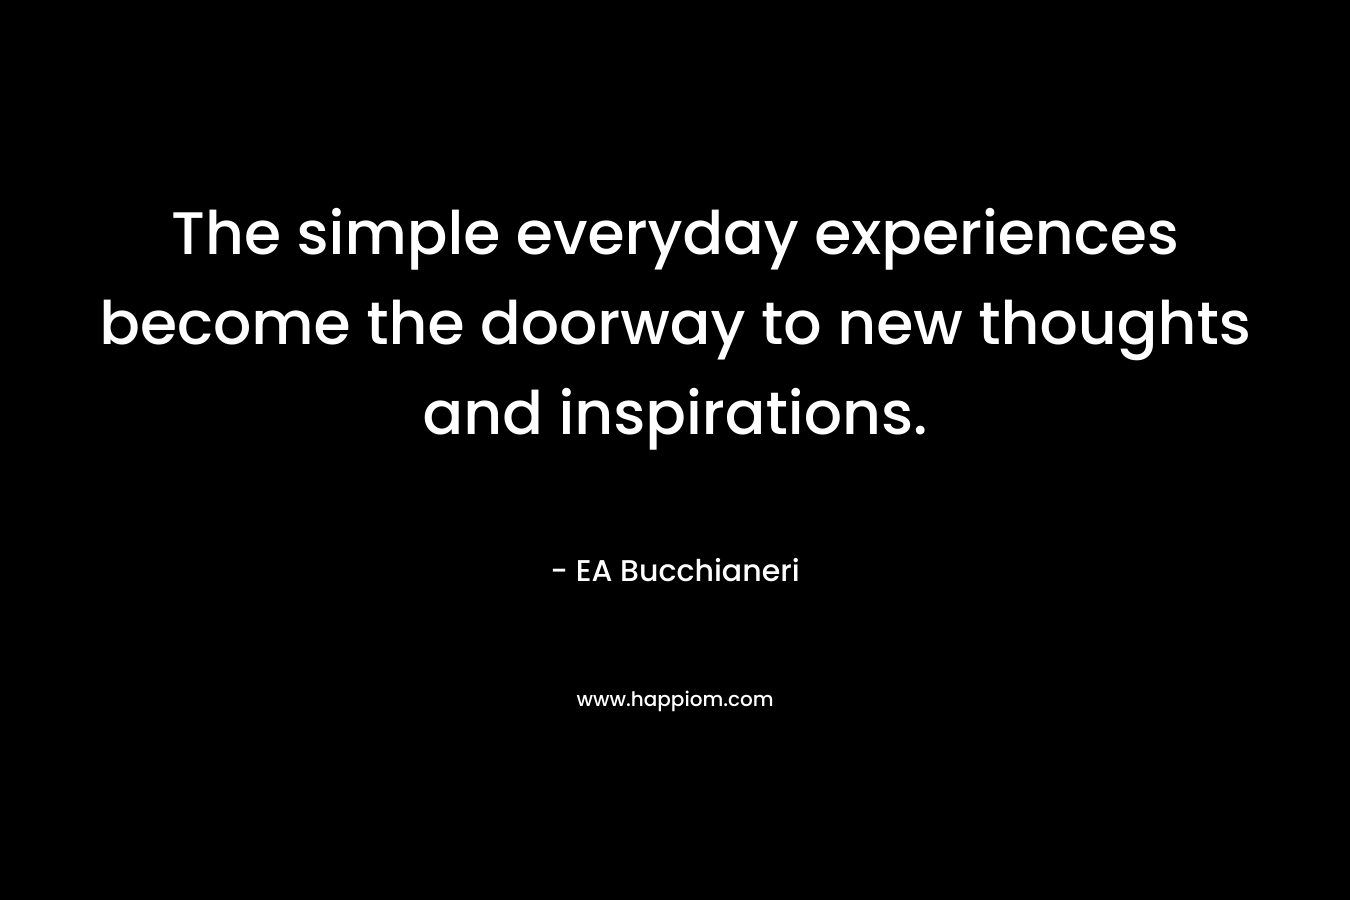 The simple everyday experiences become the doorway to new thoughts and inspirations.